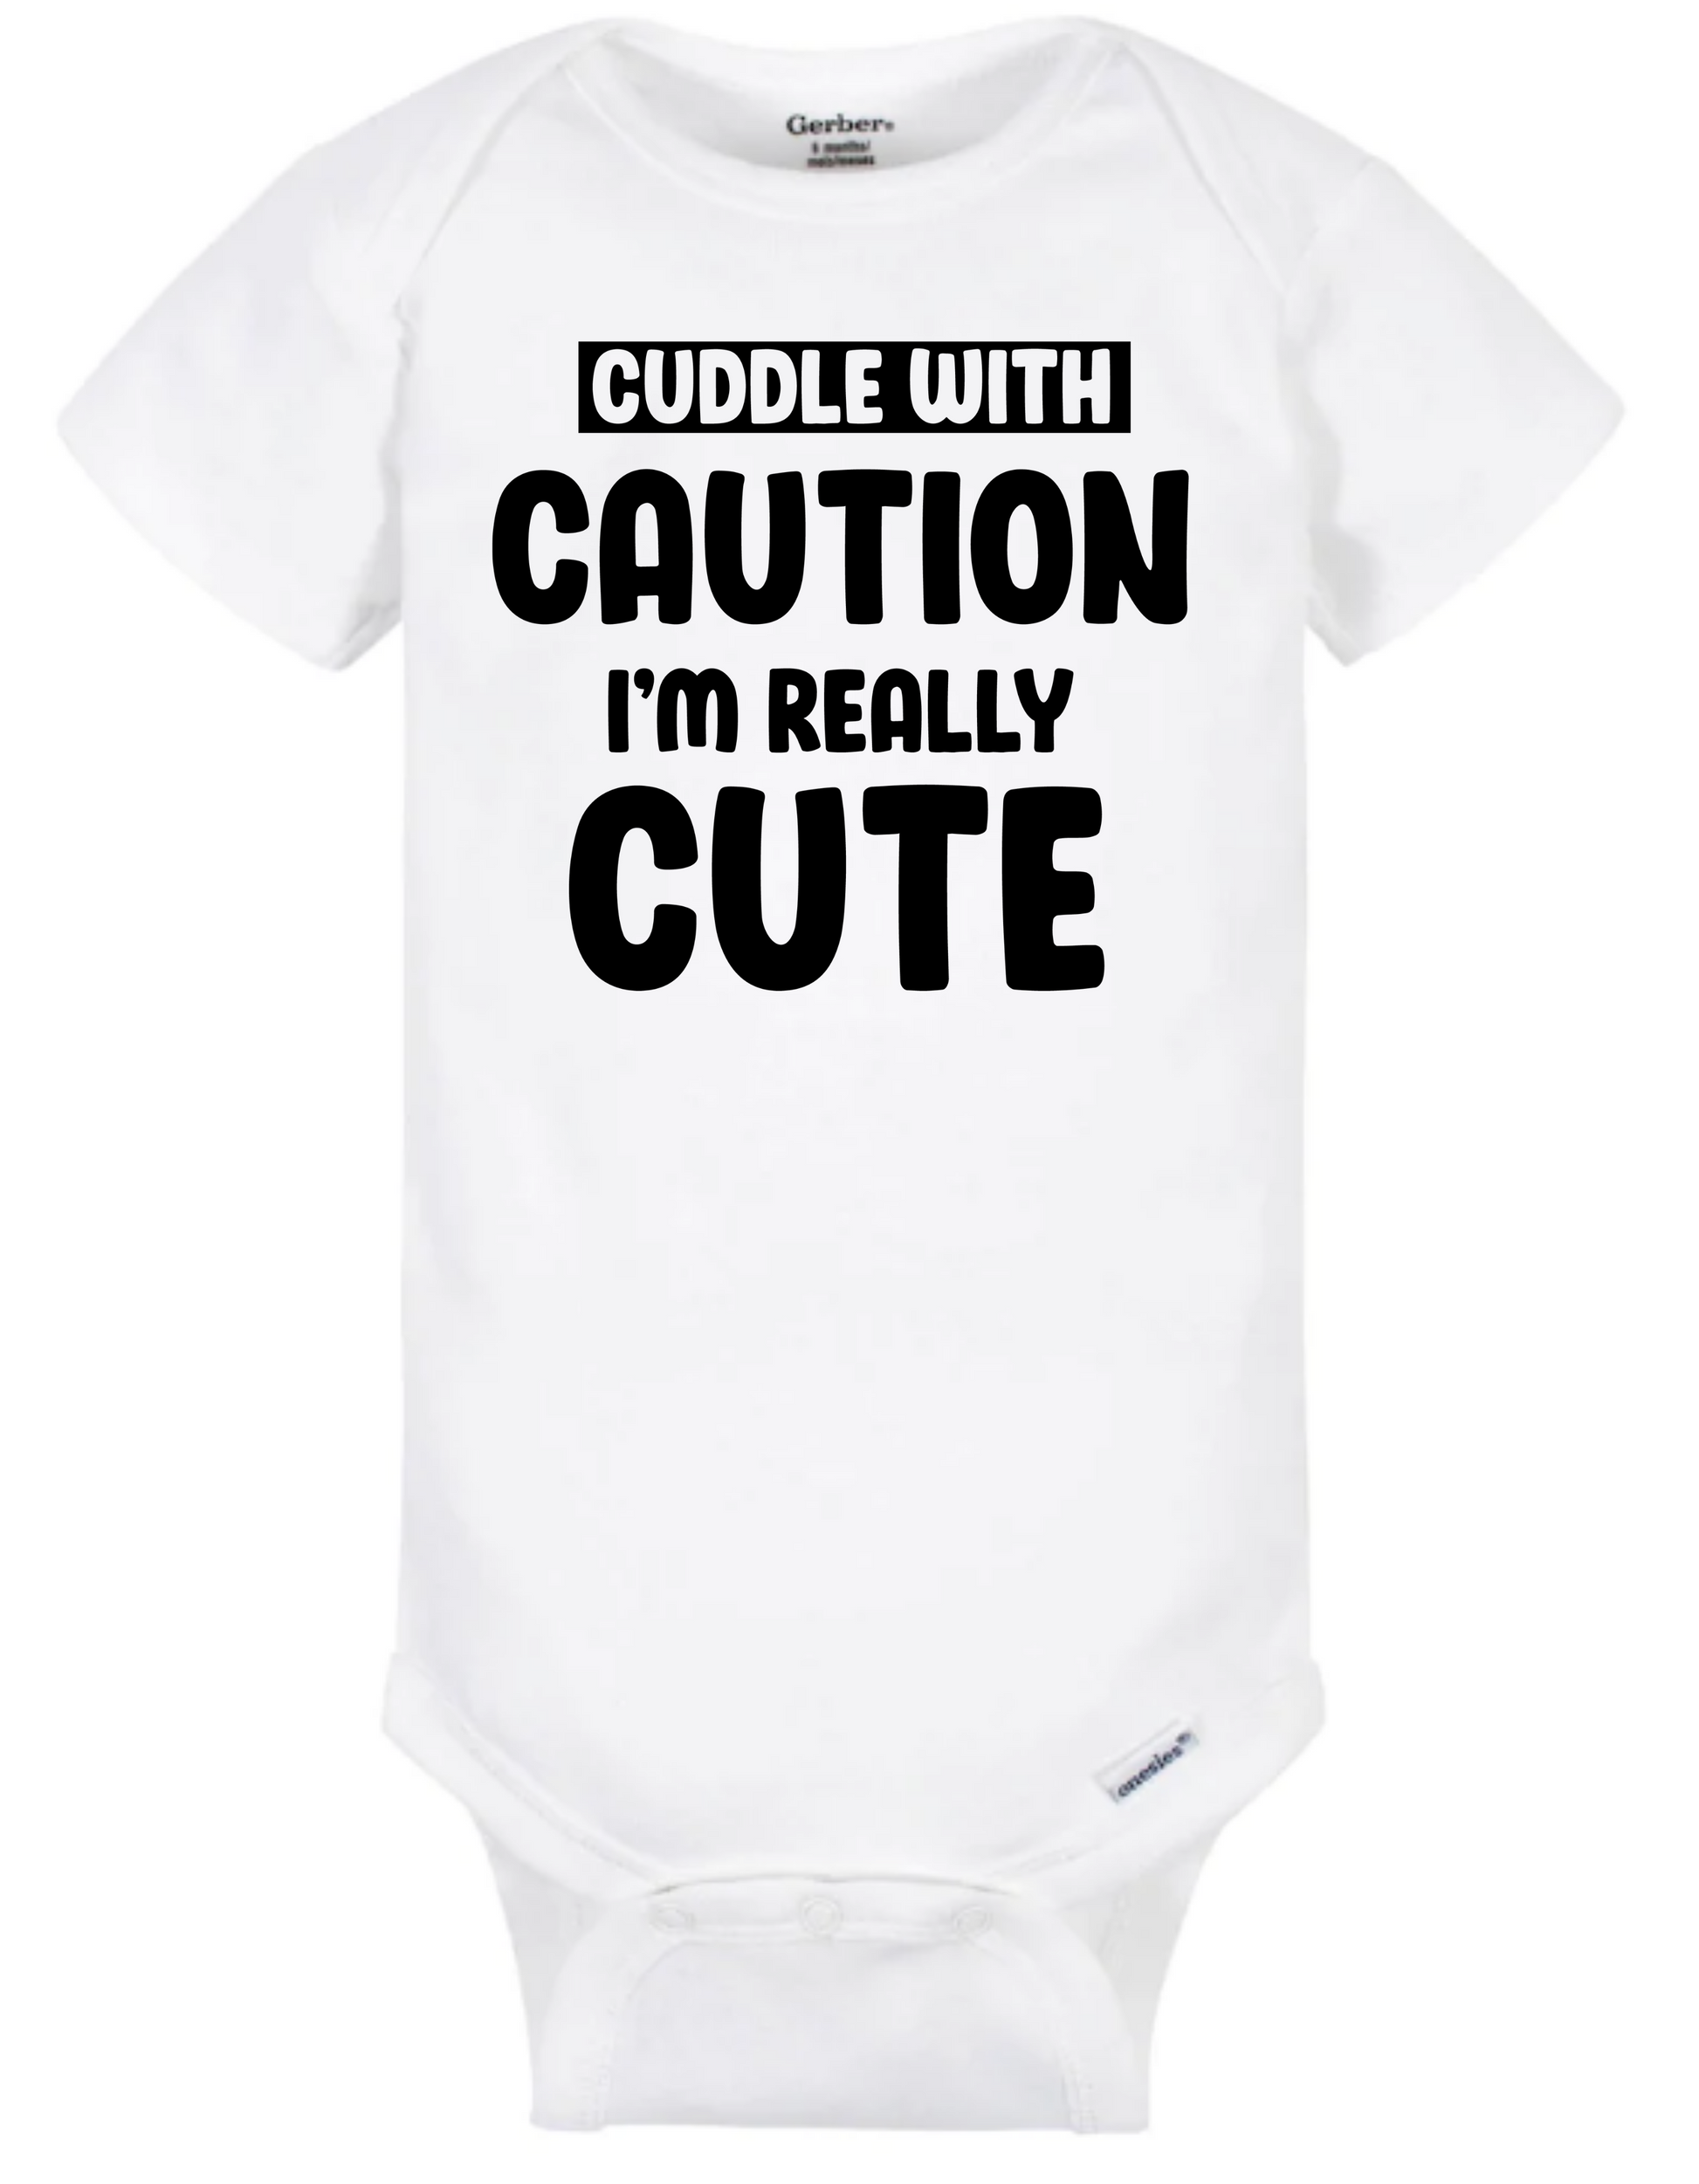 Cuddle with Caution - Onesie - Mister Snarky's